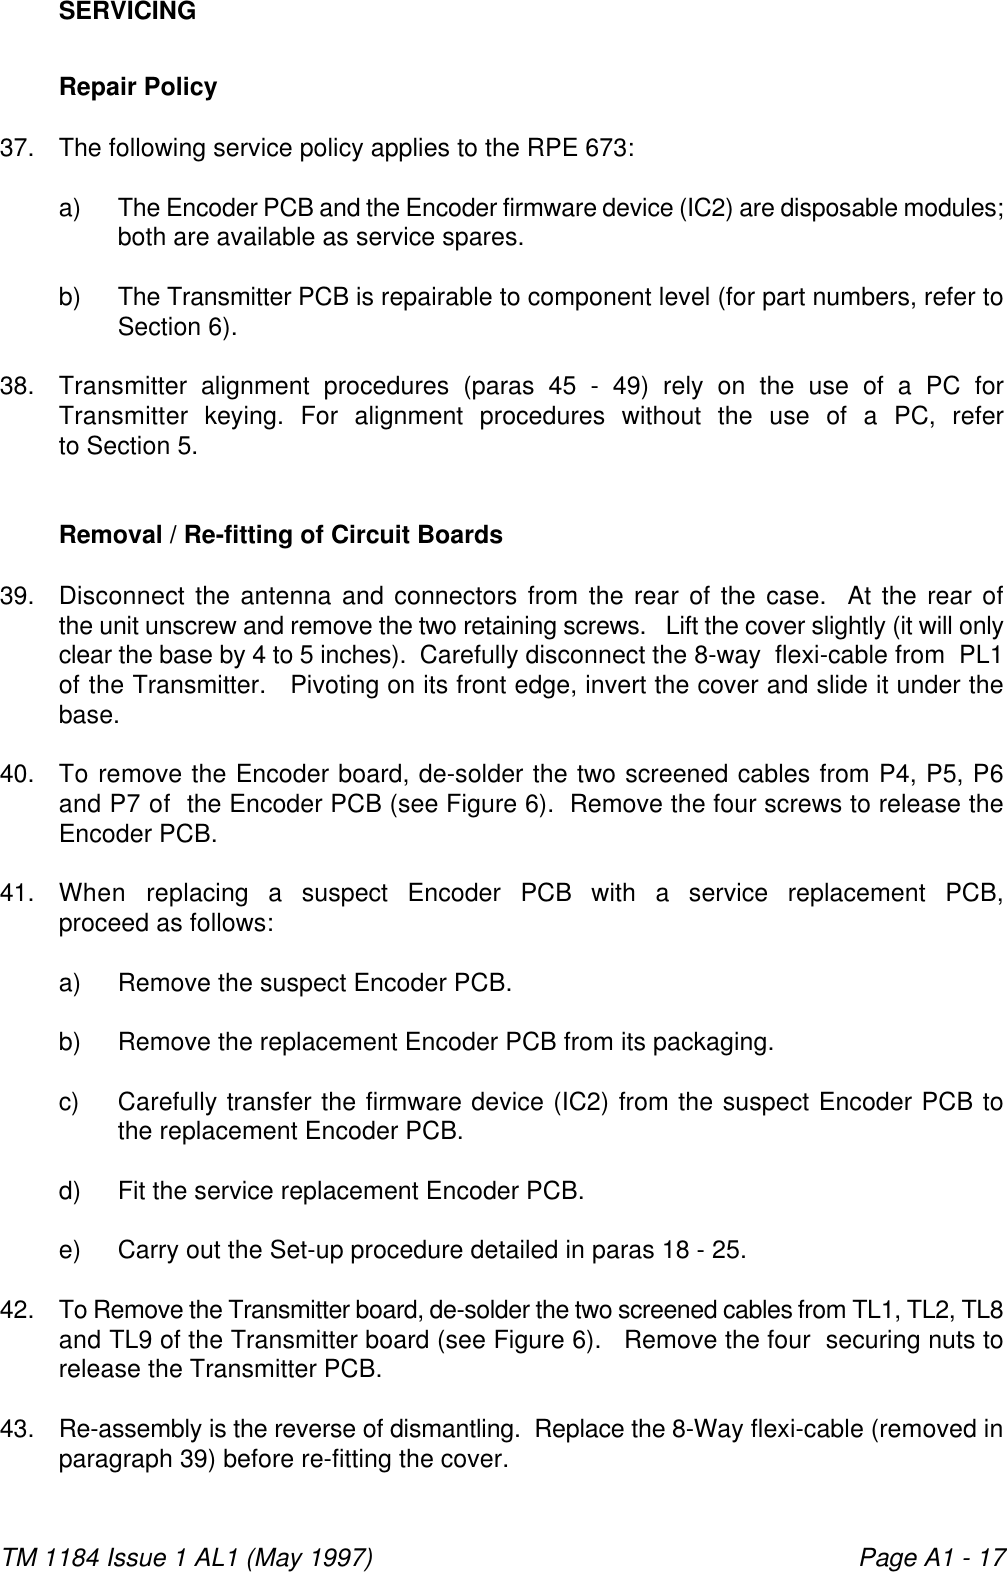 TM 1184 Issue 1 AL1 (May 1997) Page A1 - 17SERVICINGRepair Policy37. The following service policy applies to the RPE 673:a) The Encoder PCB and the Encoder firmware device (IC2) are disposable modules;both are available as service spares.b) The Transmitter PCB is repairable to component level (for part numbers, refer toSection 6).38. Transmitter alignment procedures (paras 45 - 49) rely on the use of a PC forTransmitter keying. For alignment procedures without the use of a PC, referto Section 5. Removal / Re-fitting of Circuit Boards39. Disconnect the antenna and connectors from the rear of the case.  At the rear ofthe unit unscrew and remove the two retaining screws.   Lift the cover slightly (it will onlyclear the base by 4 to 5 inches).  Carefully disconnect the 8-way  flexi-cable from  PL1of the Transmitter.   Pivoting on its front edge, invert the cover and slide it under thebase. 40. To remove the Encoder board, de-solder the two screened cables from P4, P5, P6and P7 of  the Encoder PCB (see Figure 6).  Remove the four screws to release theEncoder PCB. 41. When replacing a suspect Encoder PCB with a service replacement PCB,proceed as follows:a) Remove the suspect Encoder PCB.b) Remove the replacement Encoder PCB from its packaging.c) Carefully transfer the firmware device (IC2) from the suspect Encoder PCB tothe replacement Encoder PCB.d) Fit the service replacement Encoder PCB.e) Carry out the Set-up procedure detailed in paras 18 - 25.42. To Remove the Transmitter board, de-solder the two screened cables from TL1, TL2, TL8and TL9 of the Transmitter board (see Figure 6).   Remove the four  securing nuts torelease the Transmitter PCB.43. Re-assembly is the reverse of dismantling.  Replace the 8-Way flexi-cable (removed inparagraph 39) before re-fitting the cover.